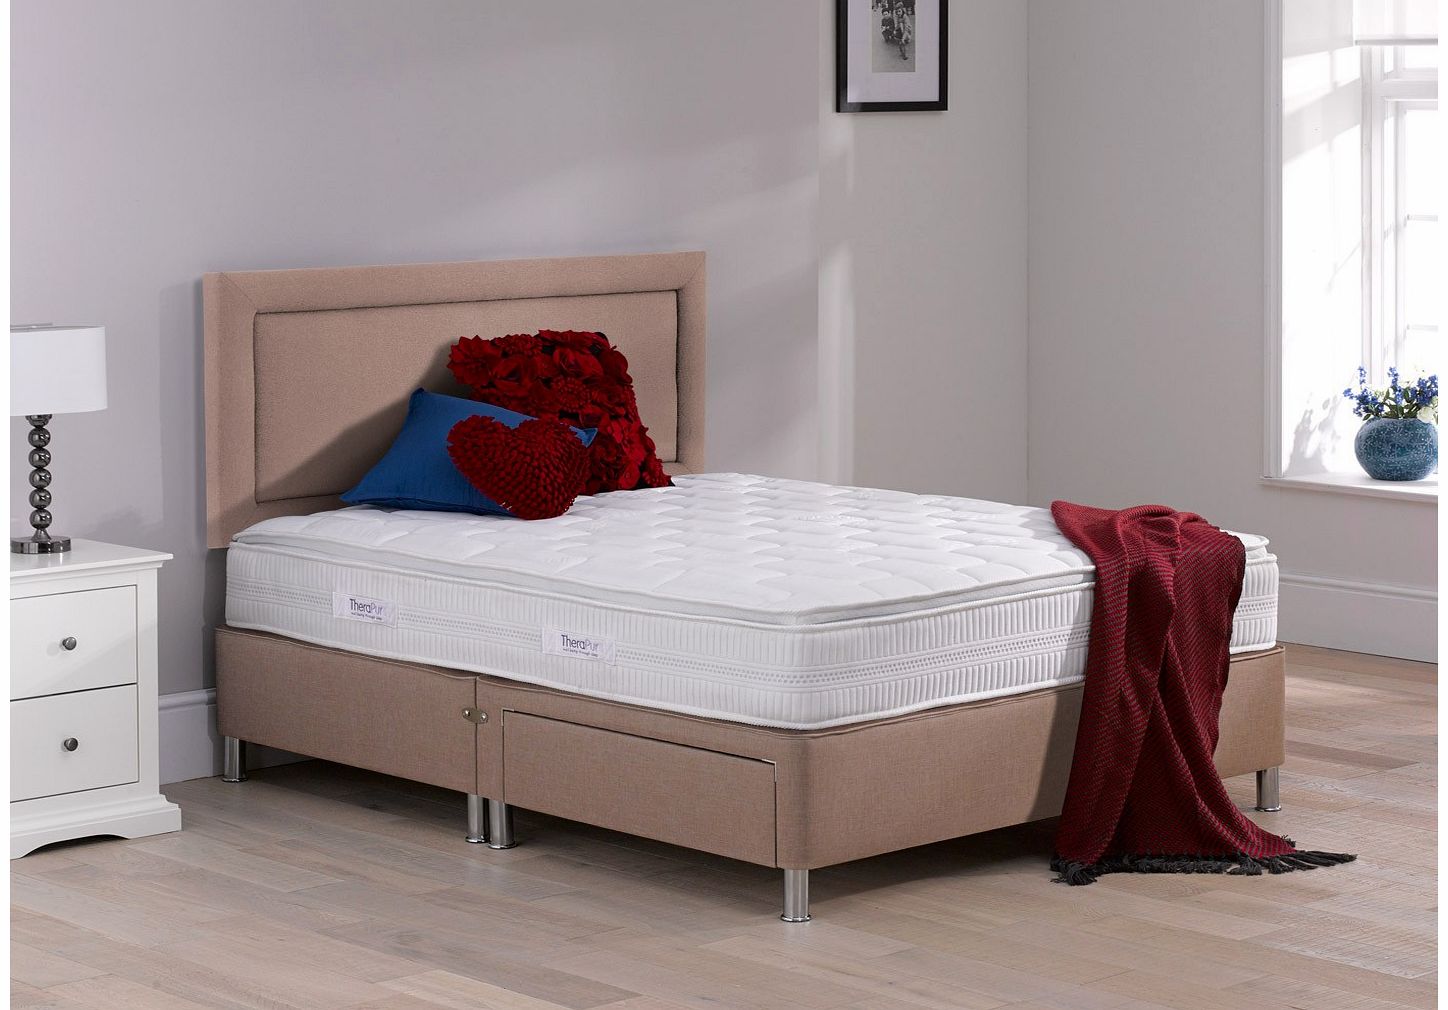 Therapur Rapport Divan Bed With Legs - Medium Firm